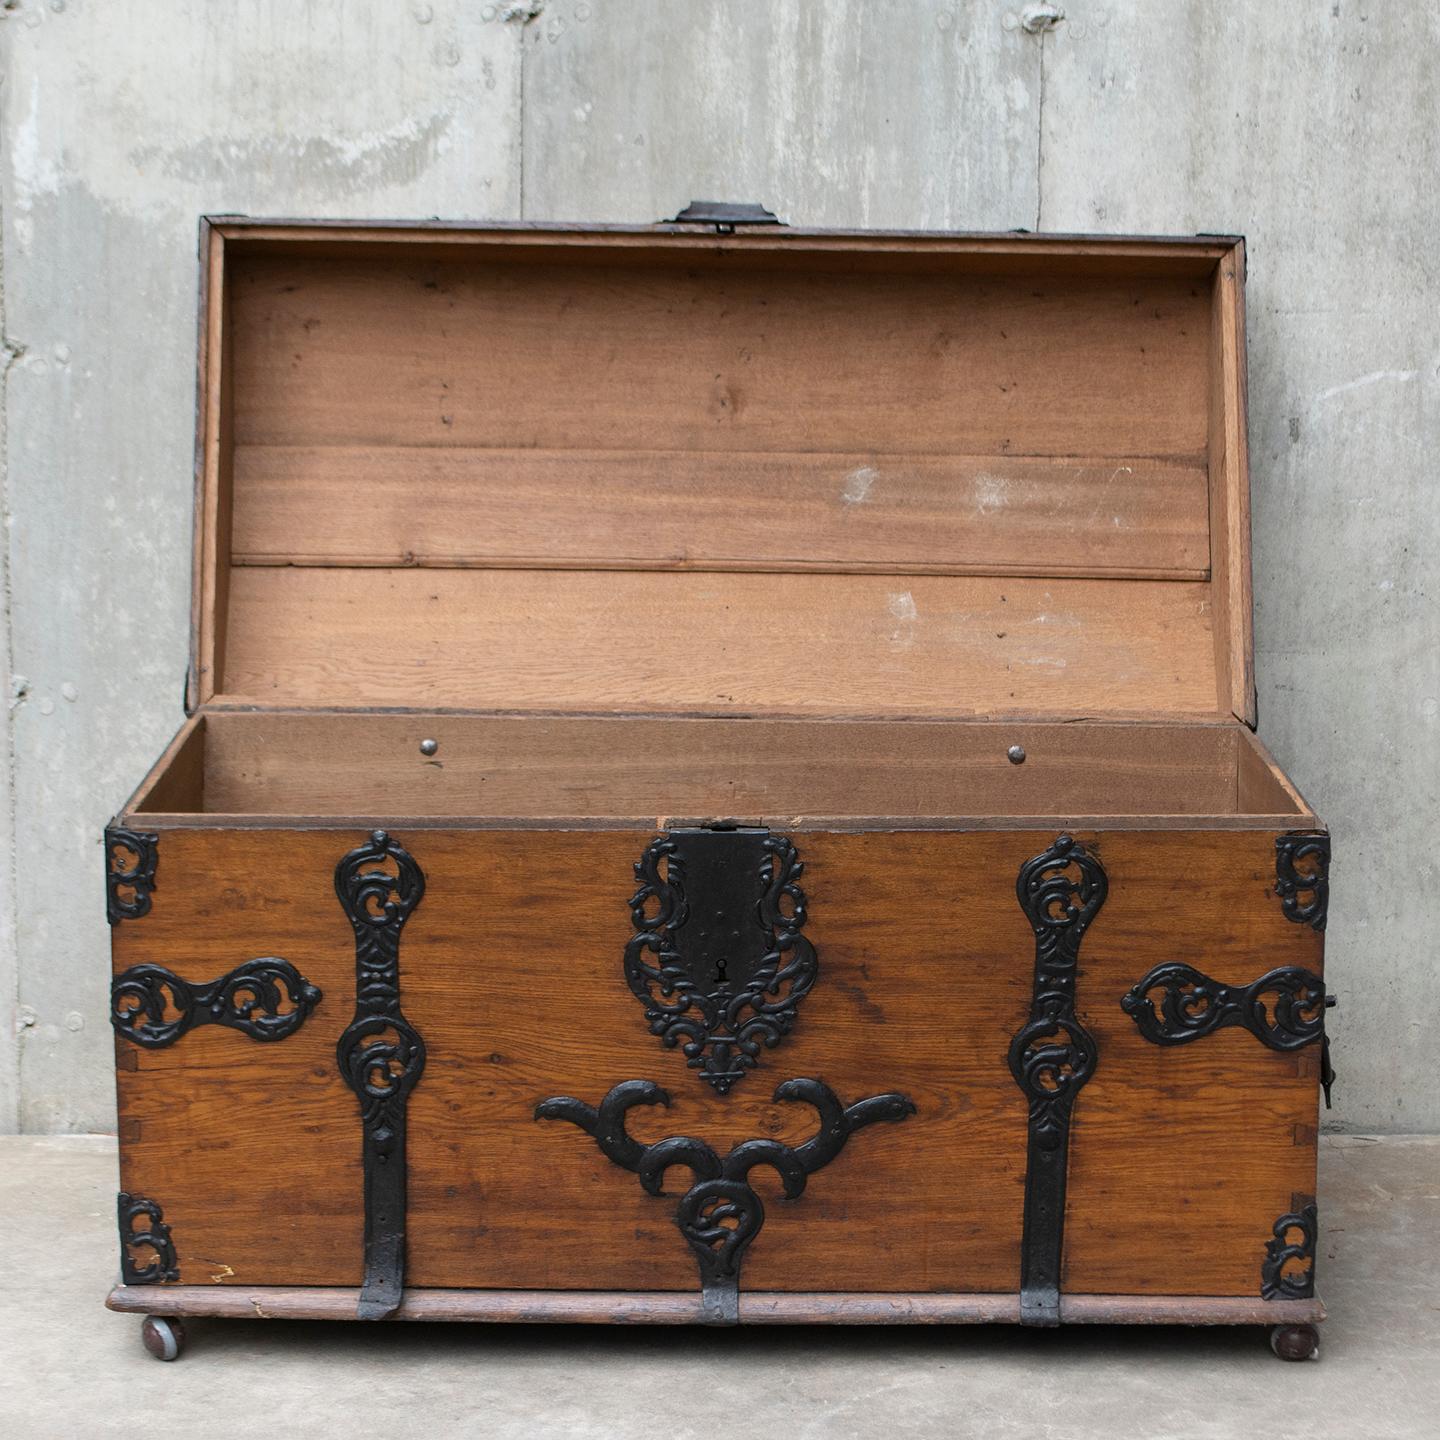 This large domed 18th Century Baroque Chest is made with solid oak and mounted with decorative iron strapwork and handles. It is a handsome example of immigrant trunks that were made in Germany from the 1600’s to the 1800’s. The warm natural color